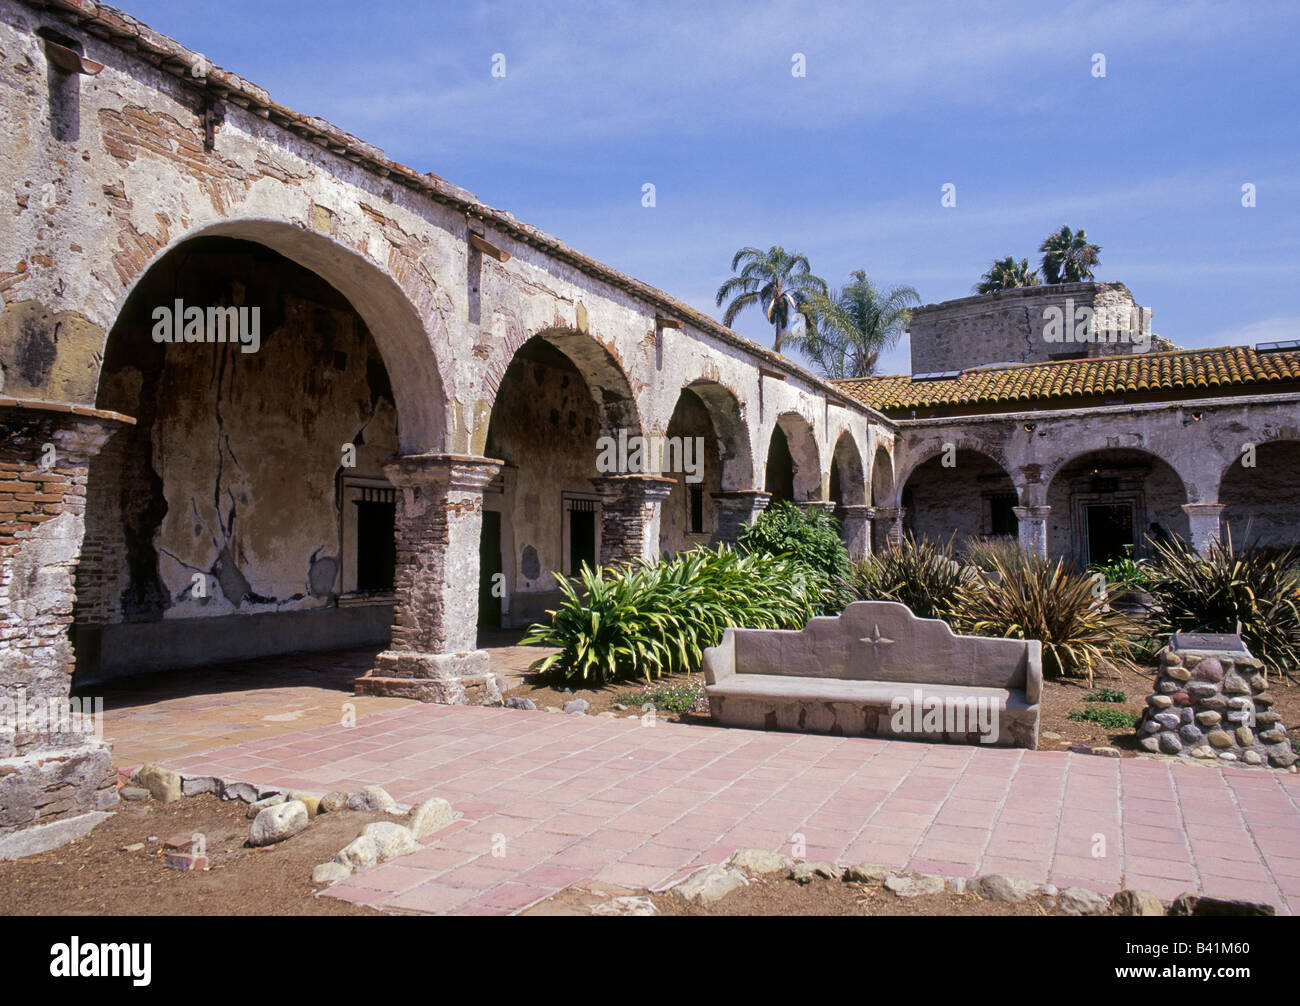 USA CALIFORNIA The beautiful archways and gardens of the old Spanish mission at San Juan Capistrano Stock Photo